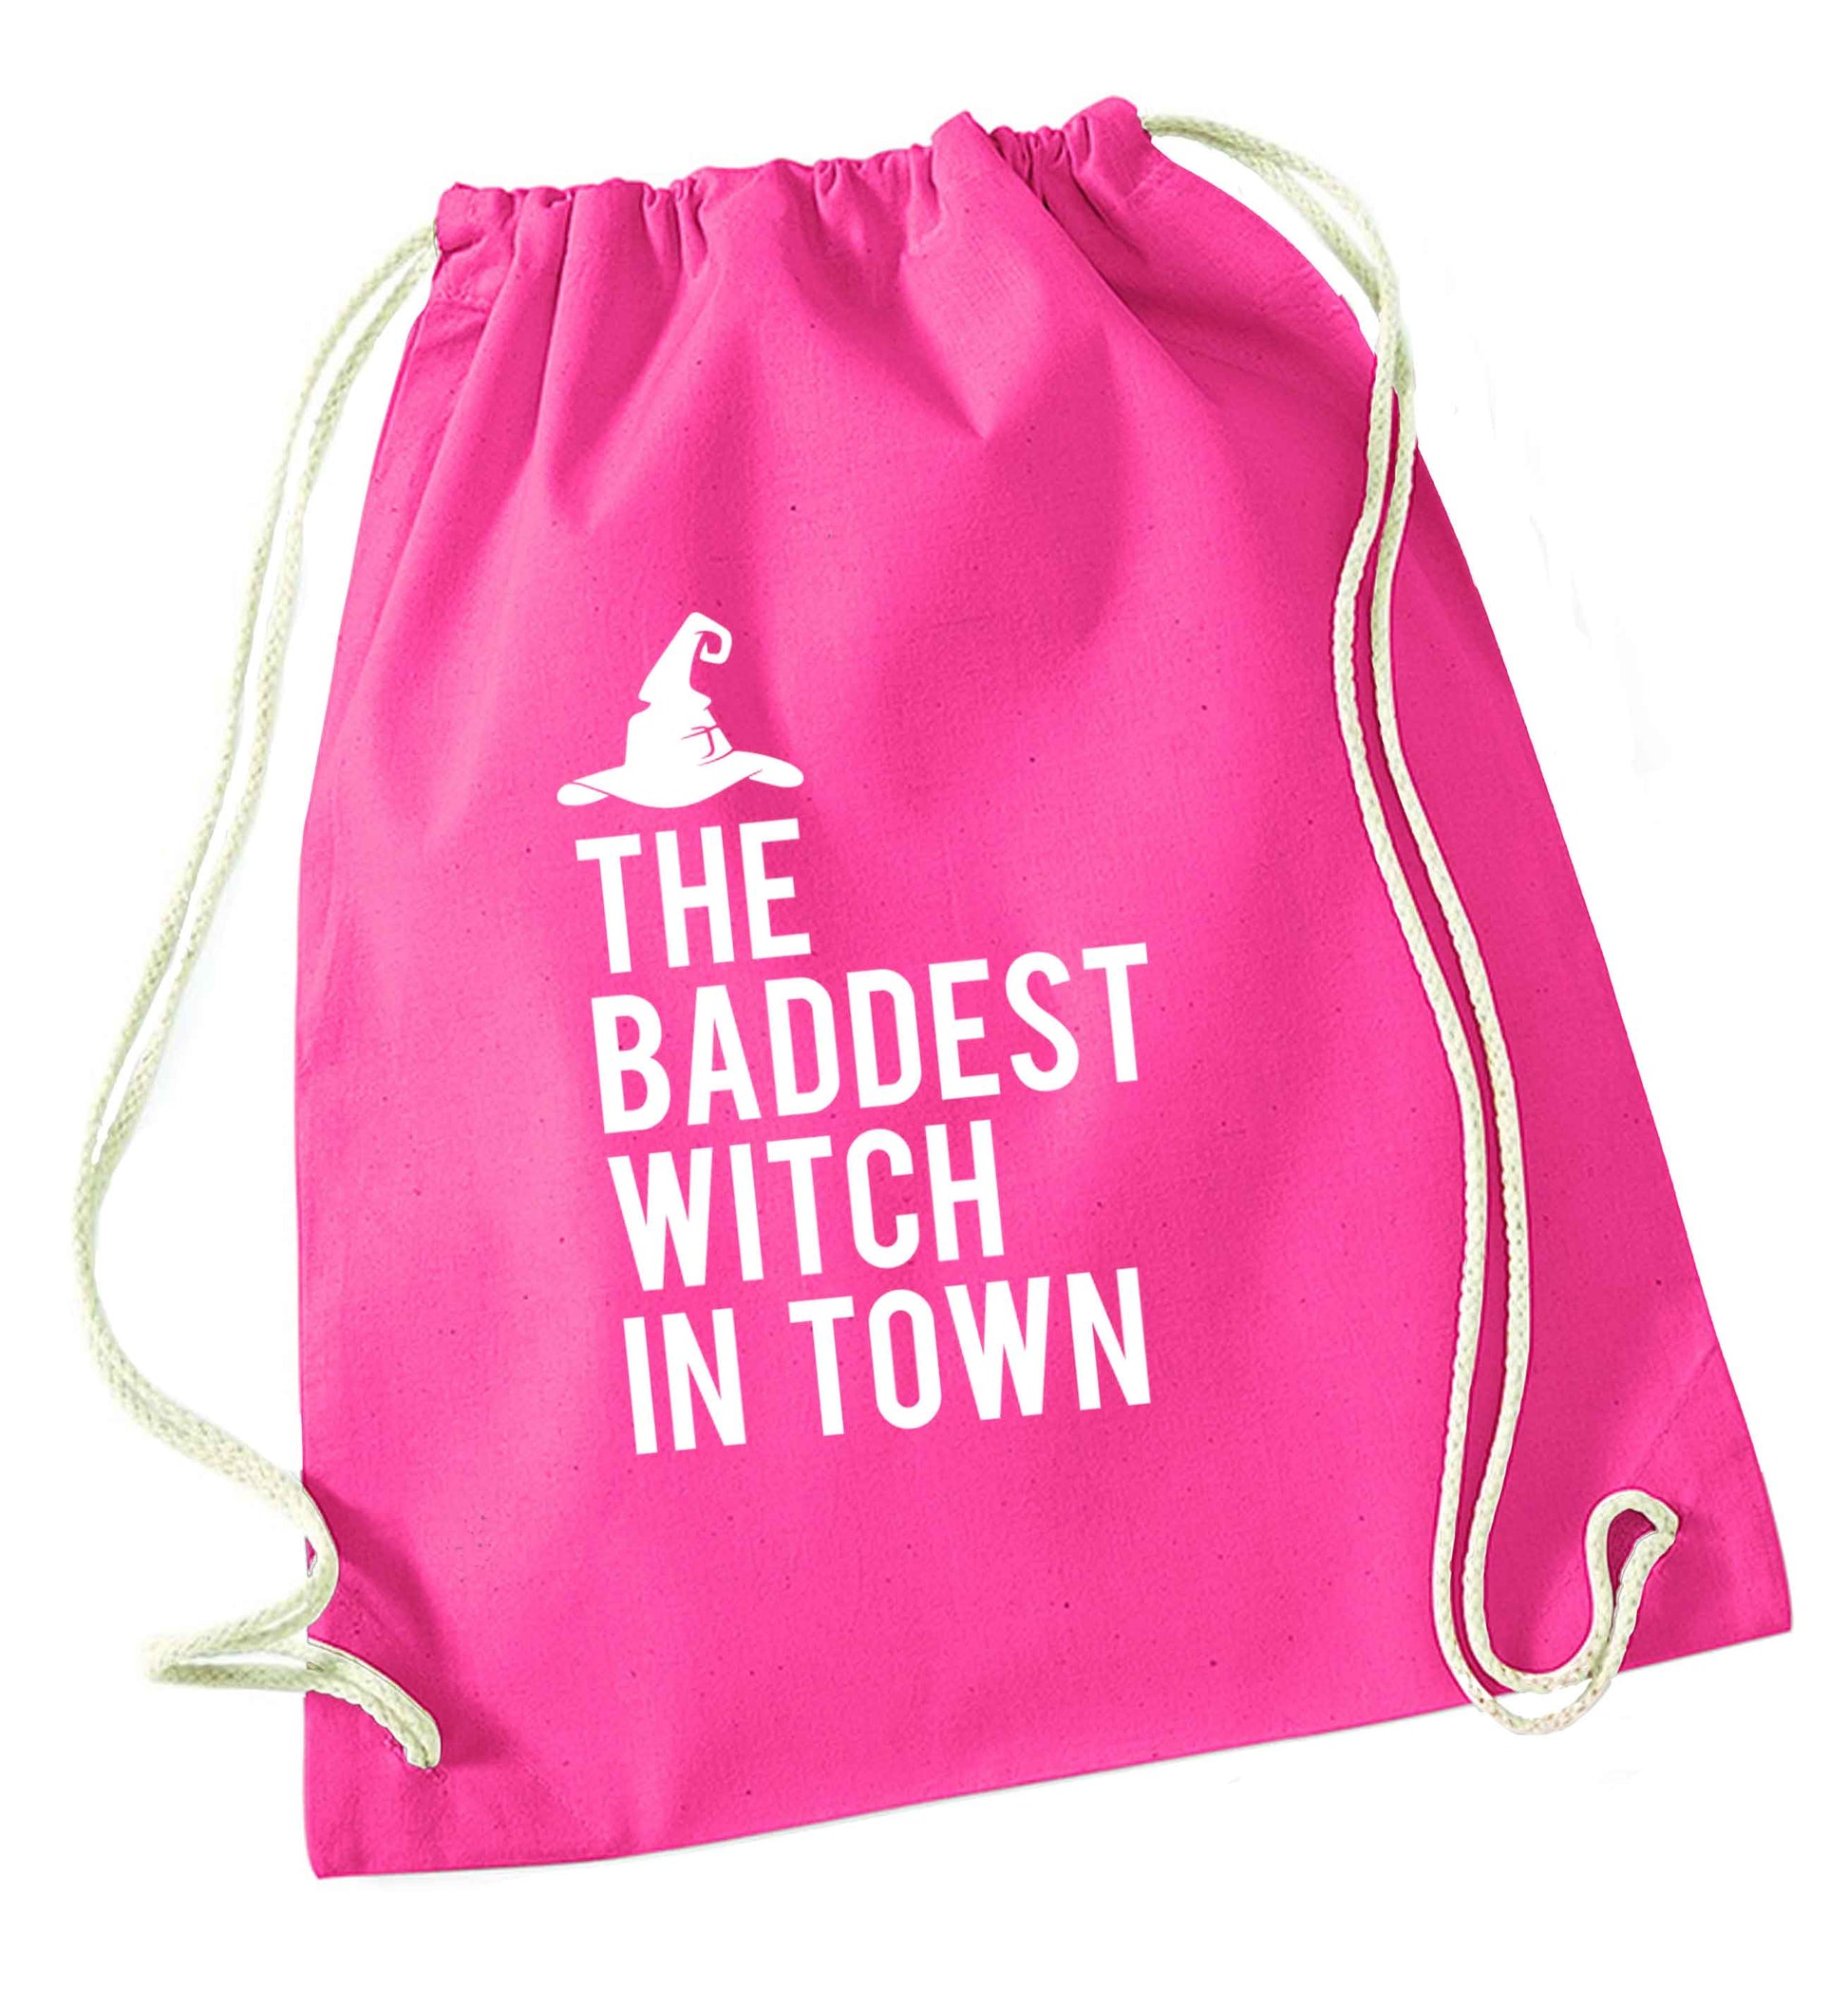 Badest witch in town pink drawstring bag